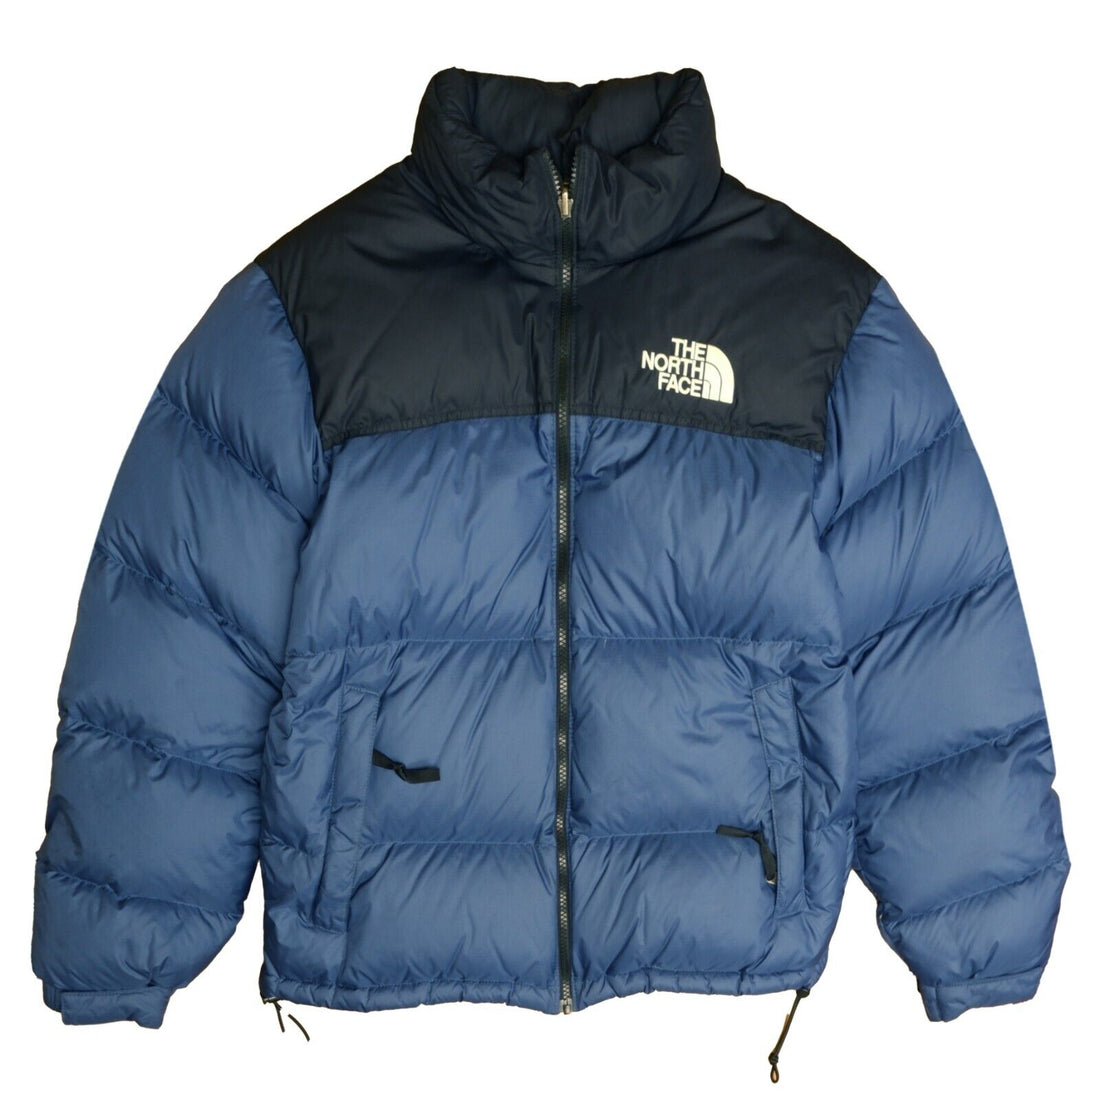 The North Face Nuptse Puffer Jacket Size Medium Blue 700 Down Insulated